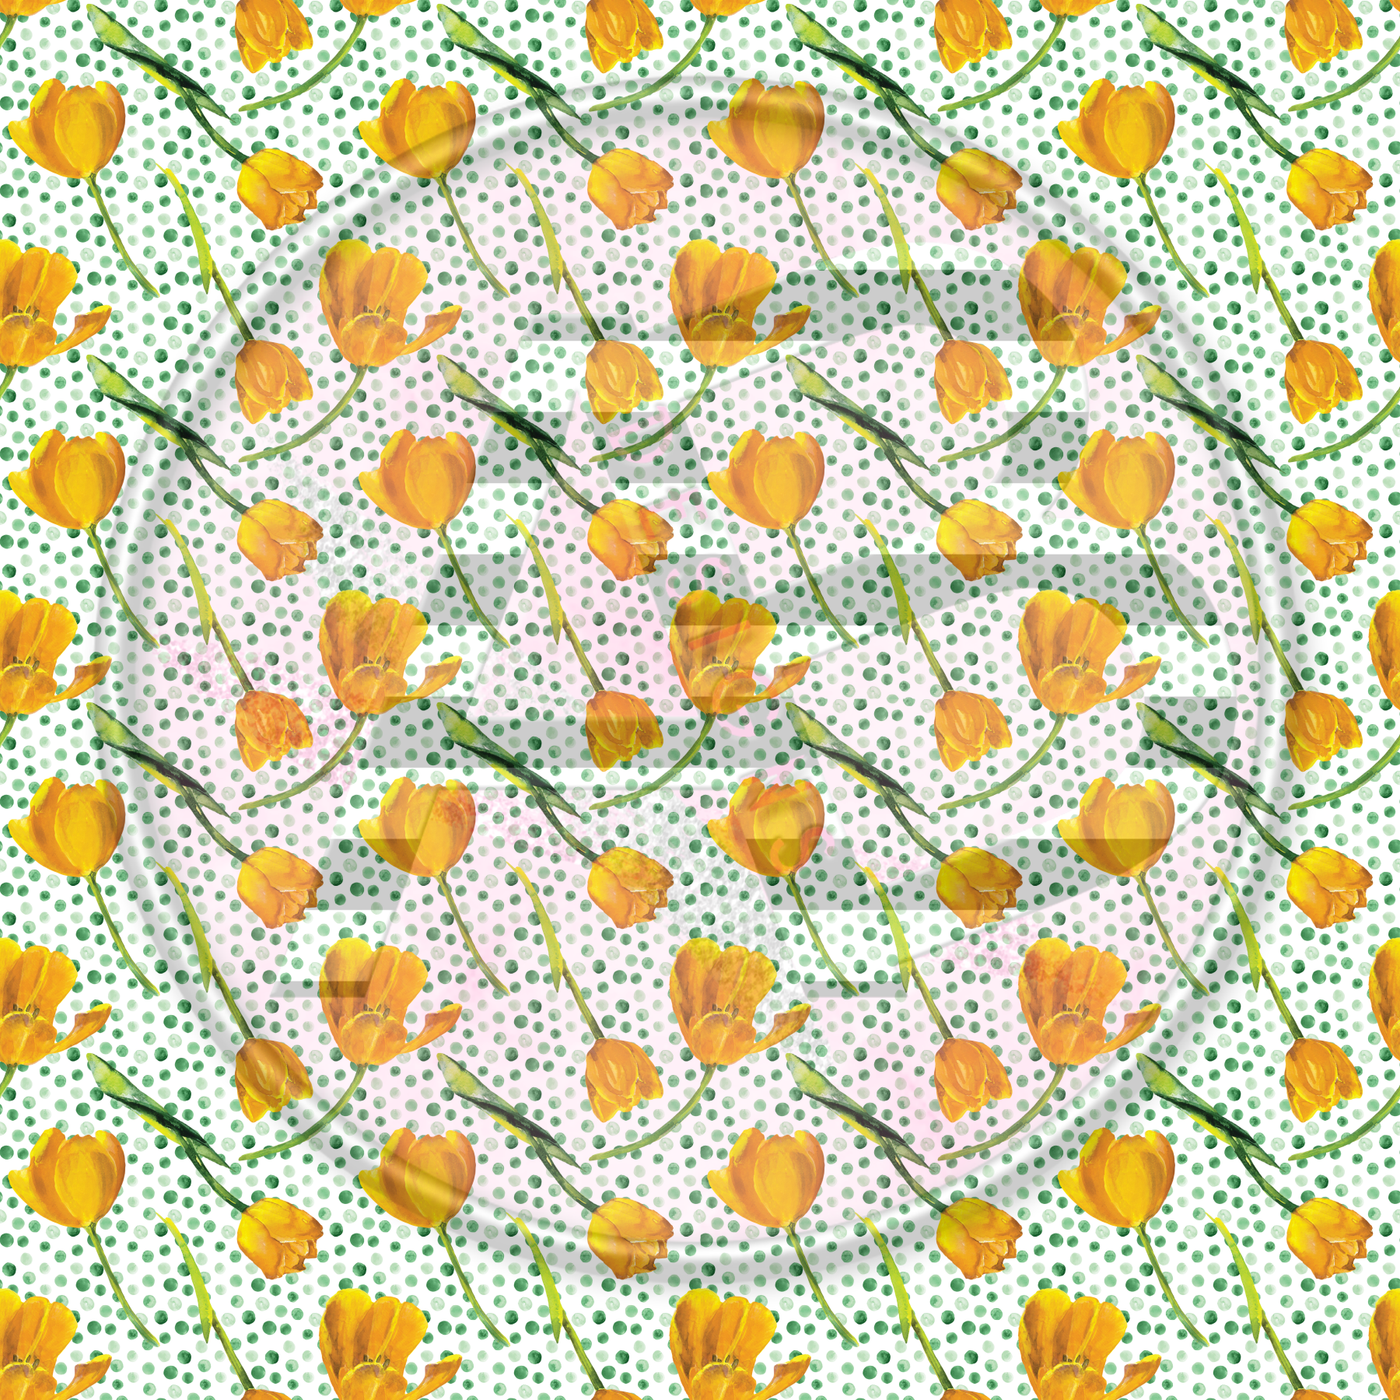 Adhesive Patterned Vinyl - Tulips 07 Smaller